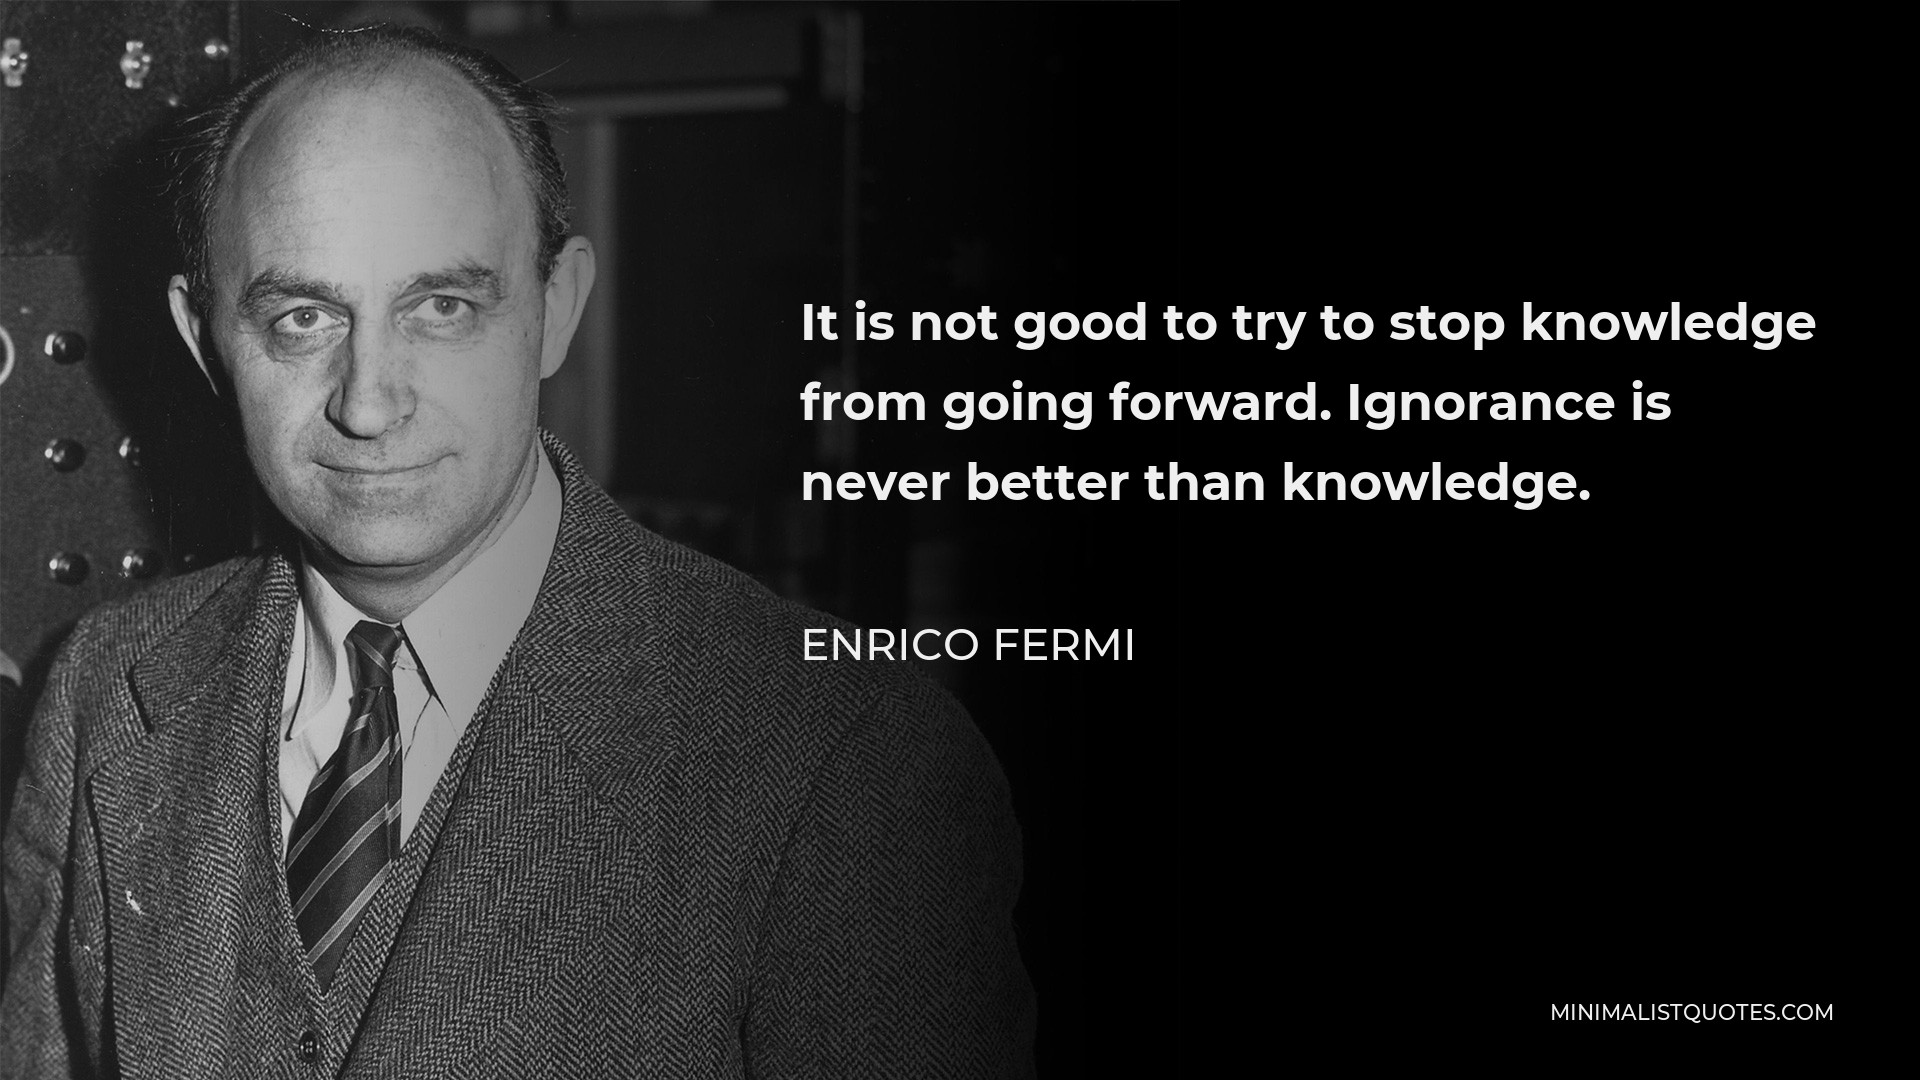 Enrico Fermi Quote - It is not good to try to stop knowledge from going forward. Ignorance is never better than knowledge.